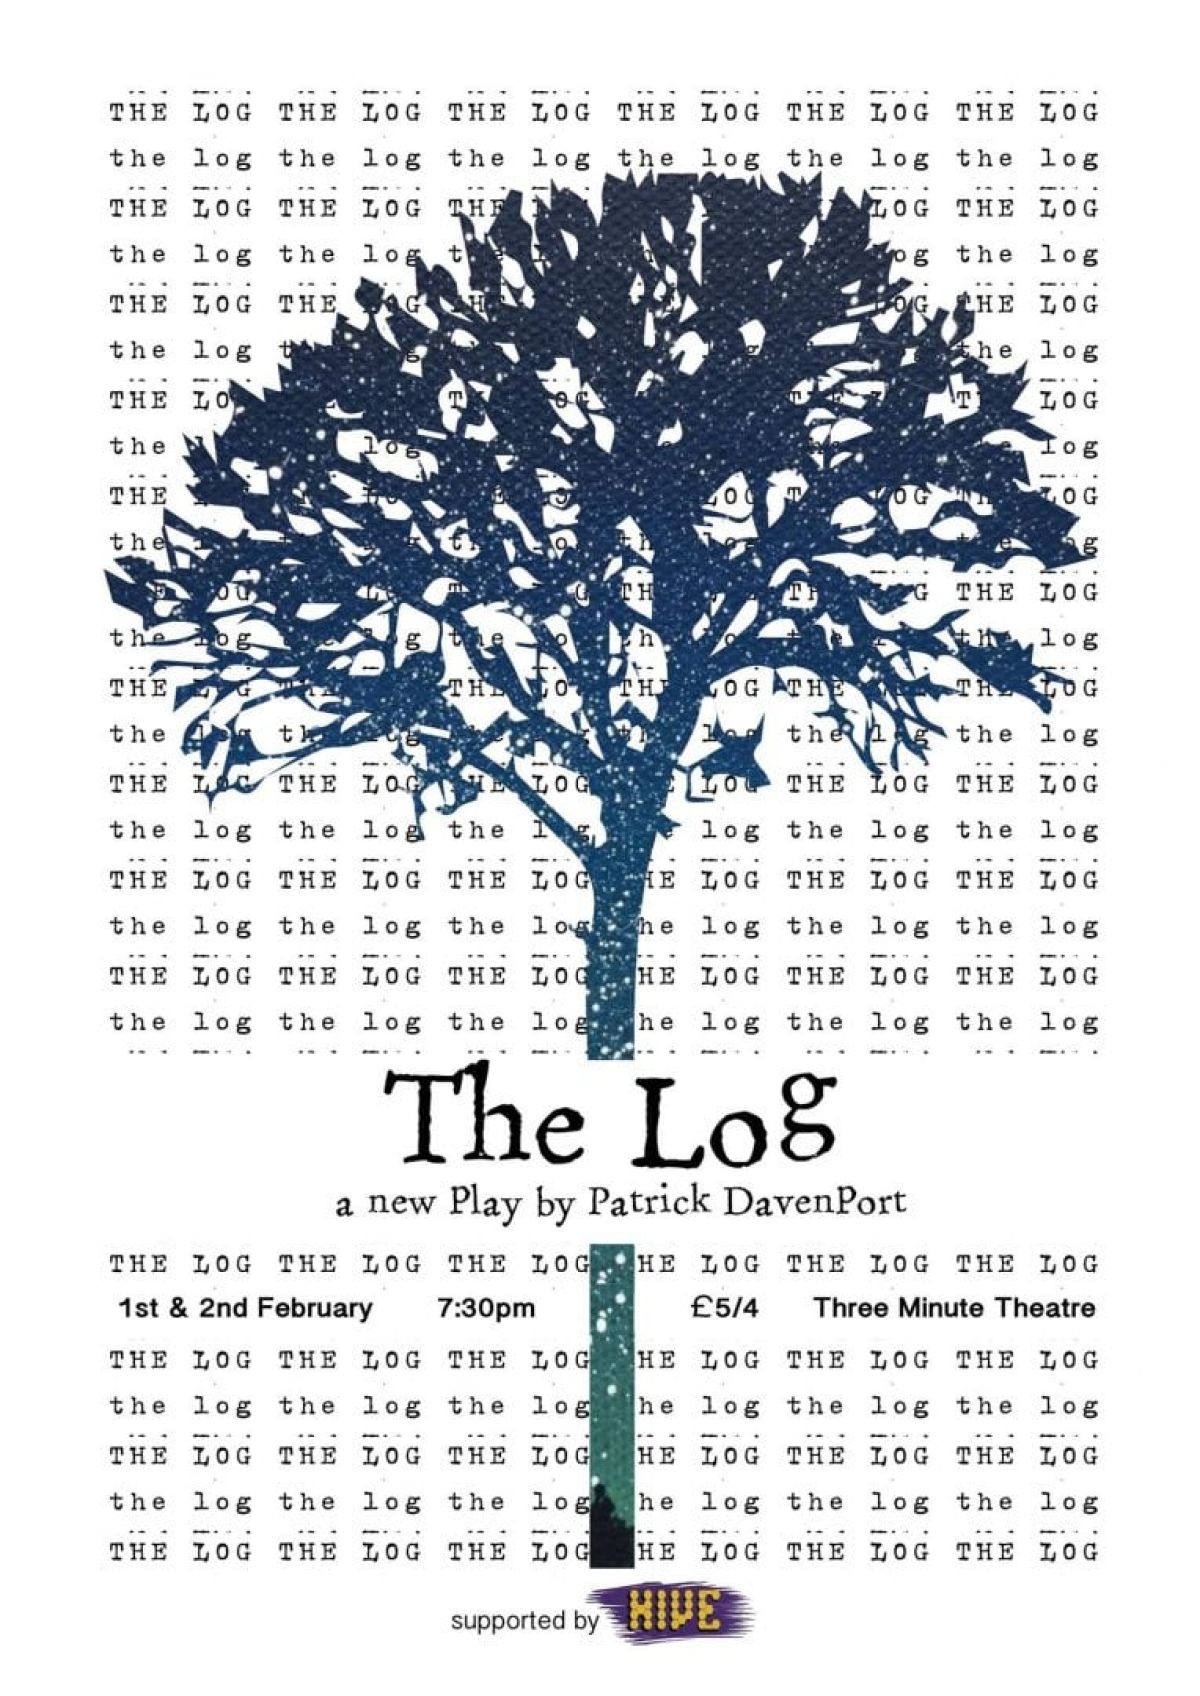 Review: The Log